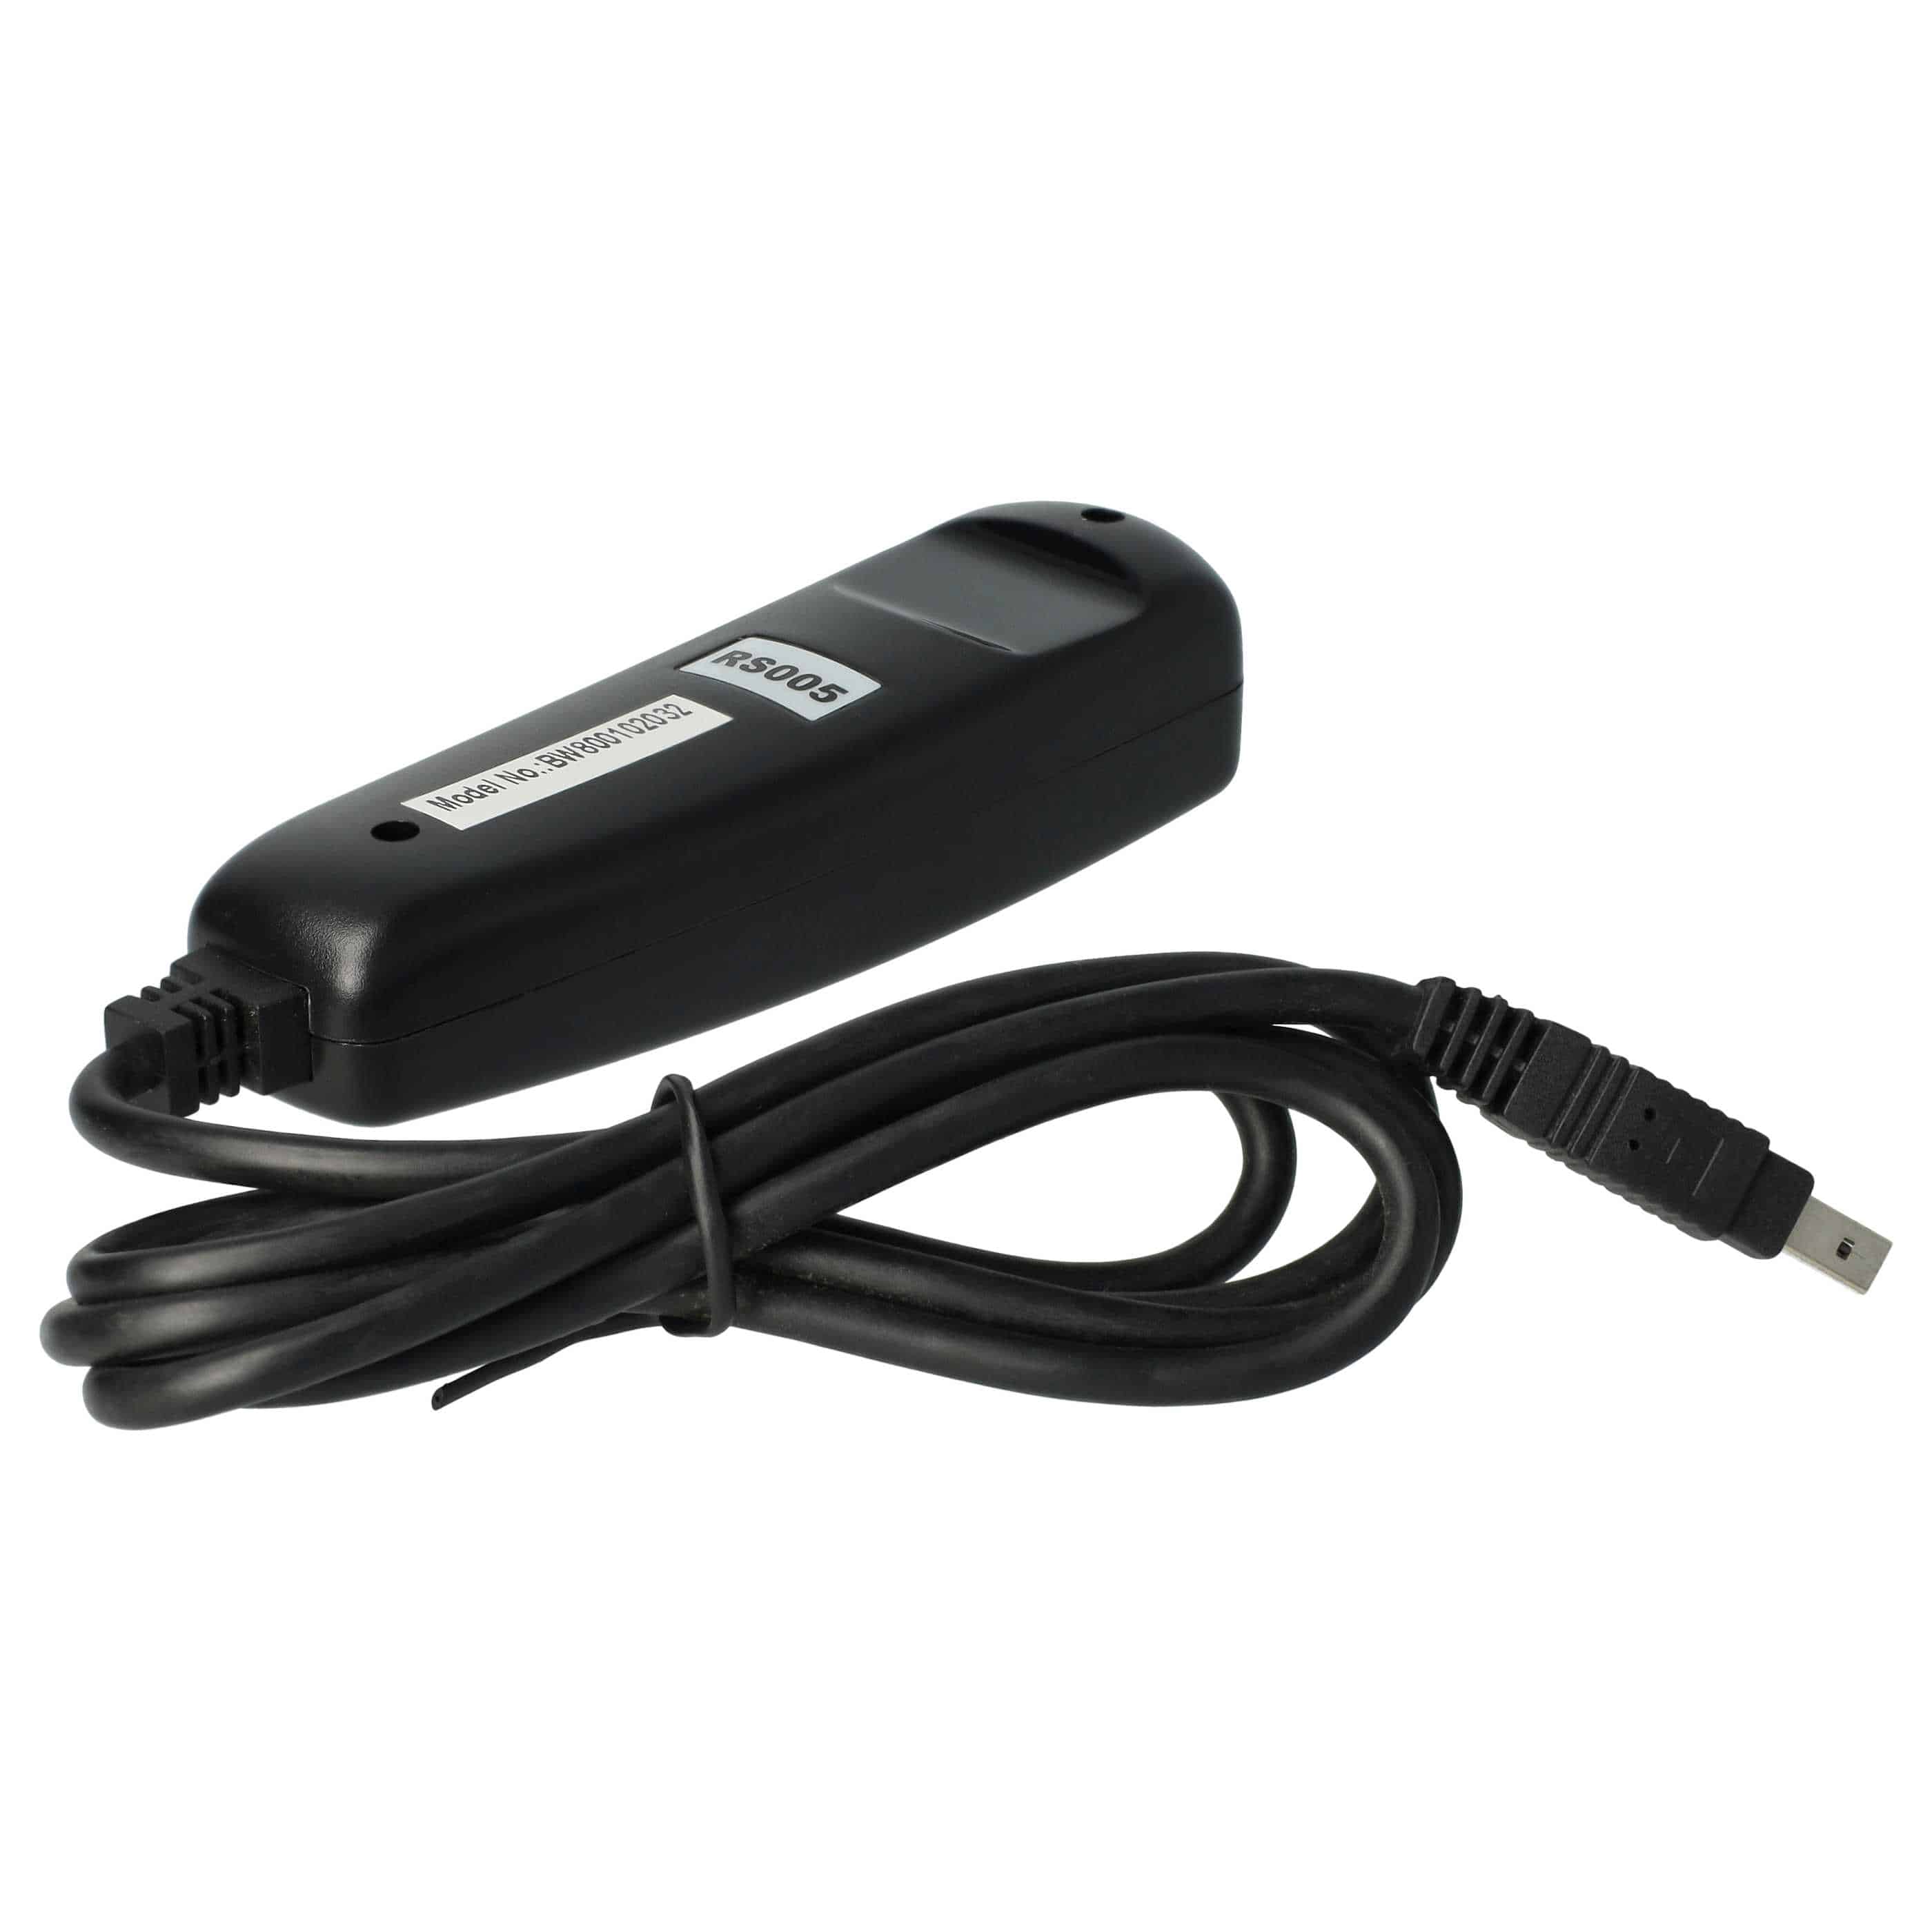 Remote Trigger as Exchange for Nikon MC-DC1 for Camera 2-Step Shutter, 1 m Lead